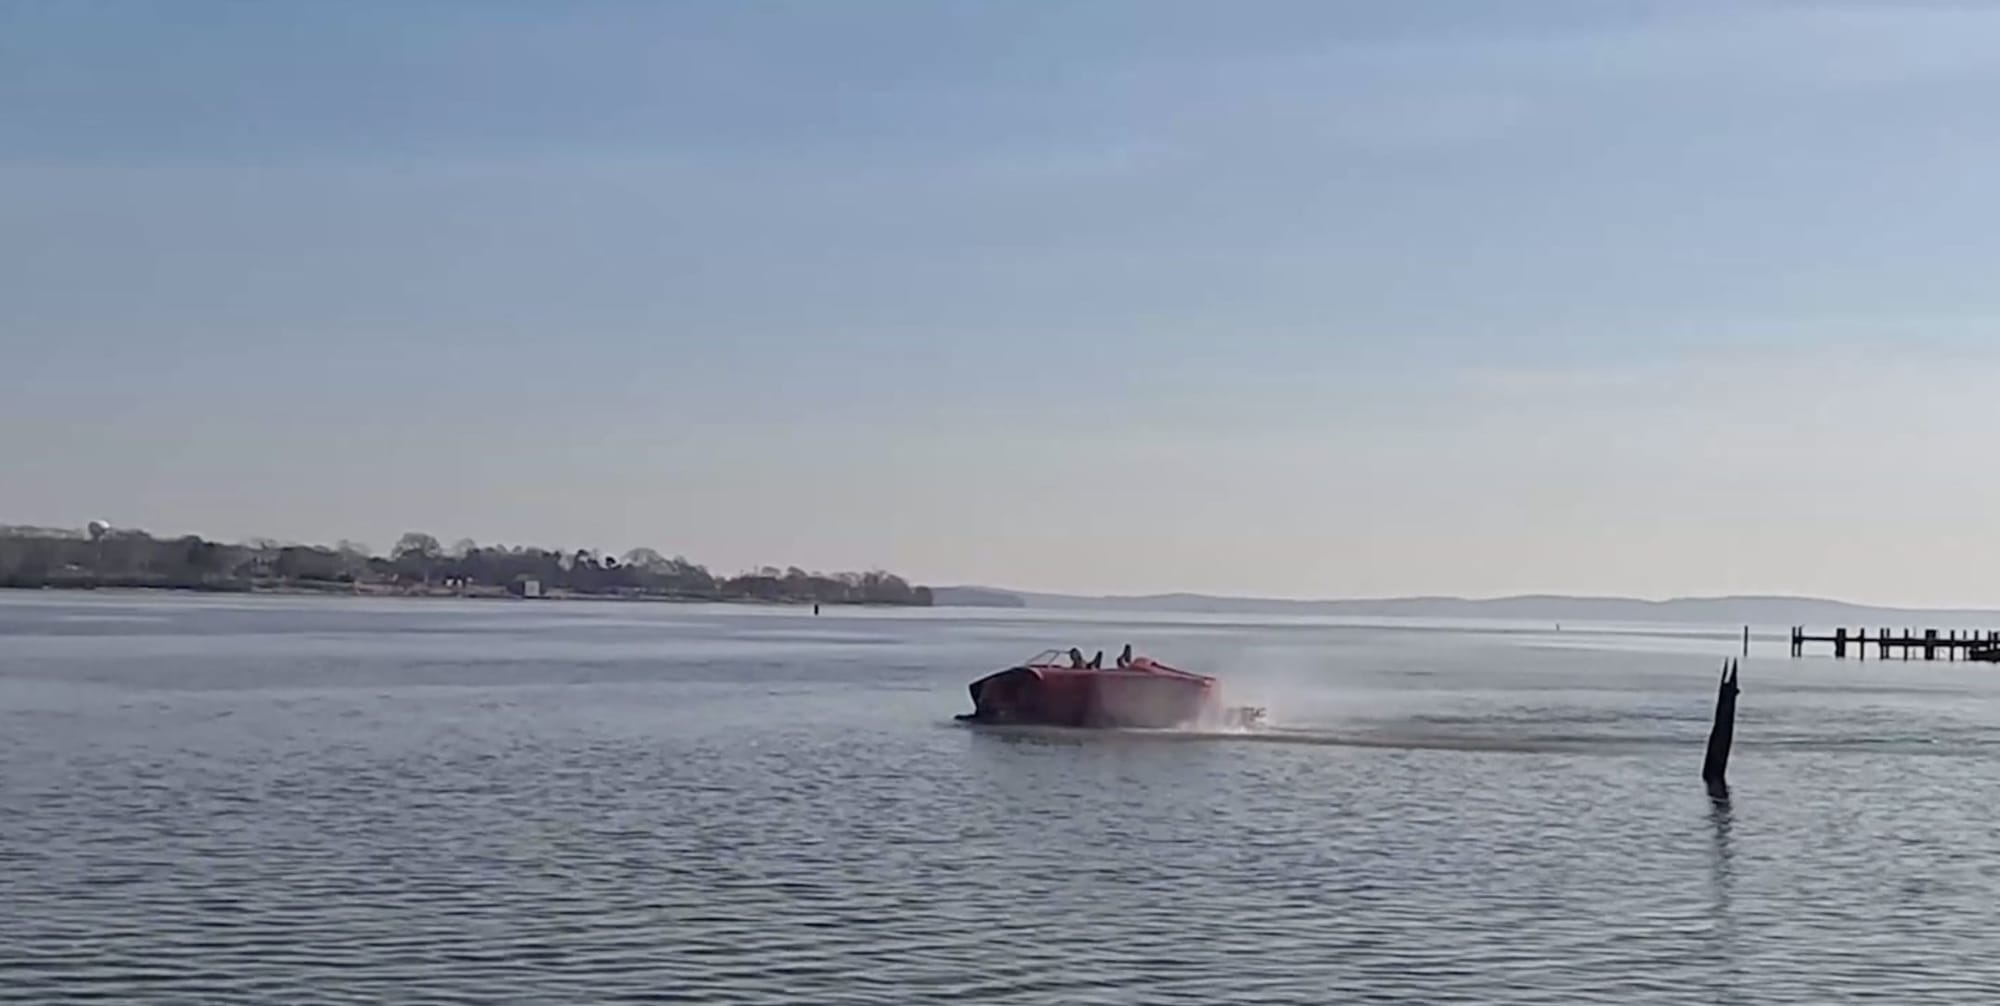 Arosa luxury hovercraft out on the water.